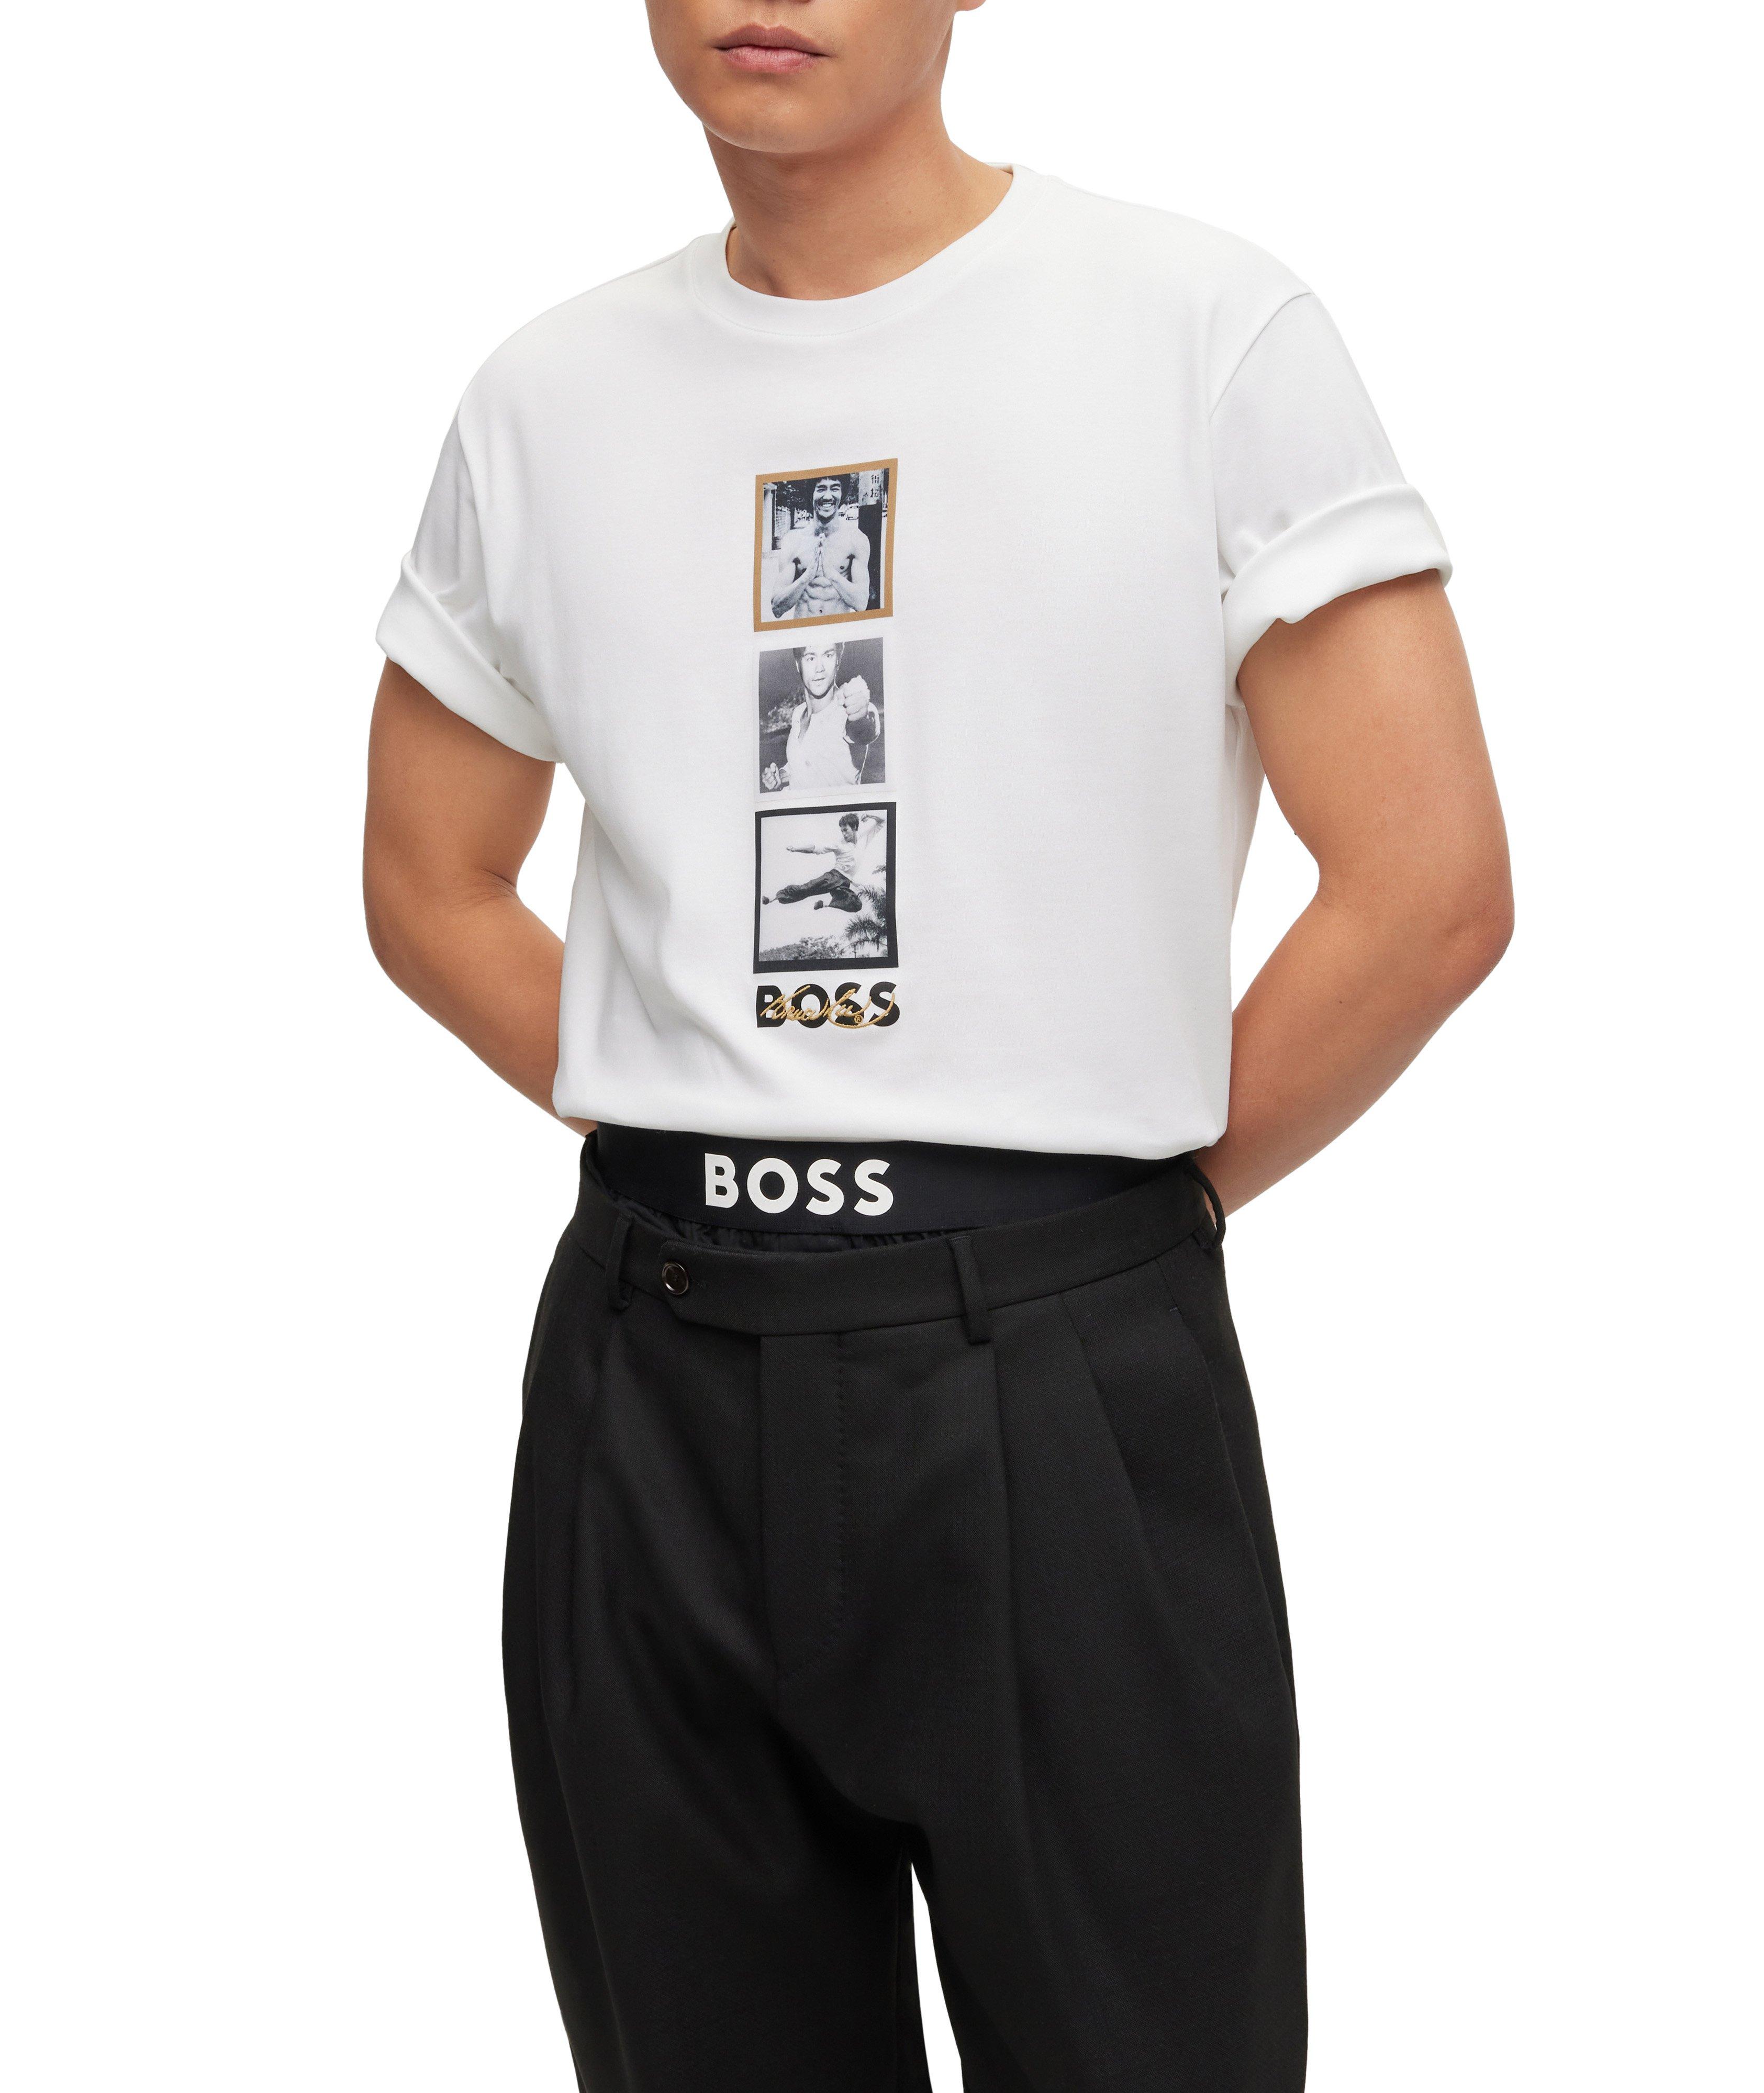 BOSS Legends Bruce Lee Collection Triptych Printed T-Shirt image 1